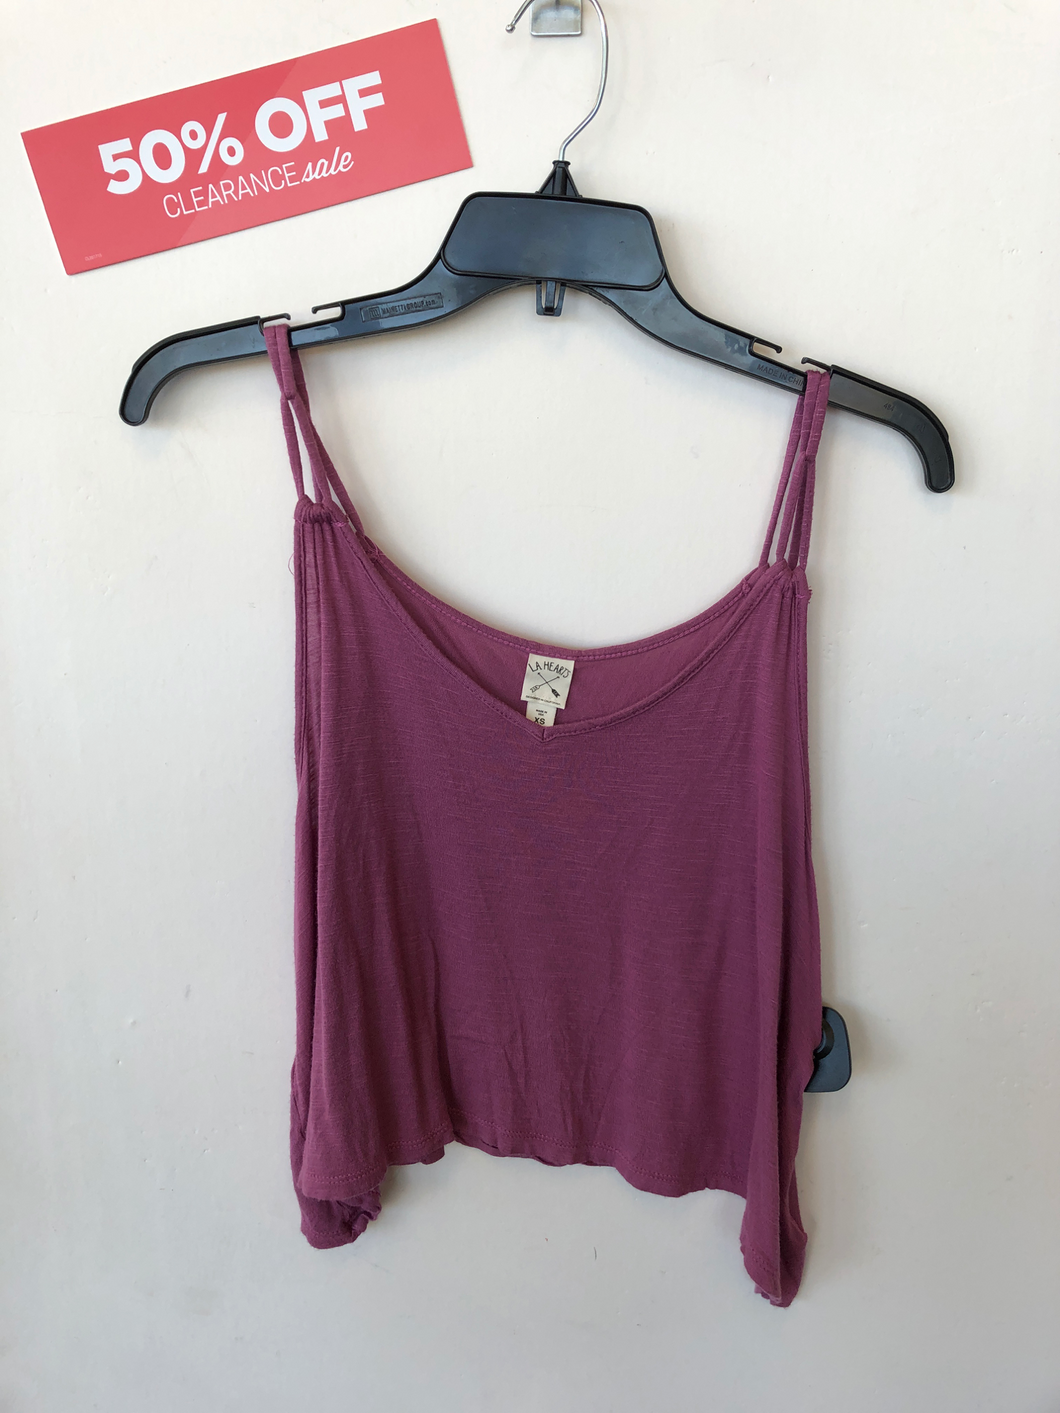 L.A. Hearts Tank Top Size Extra Small